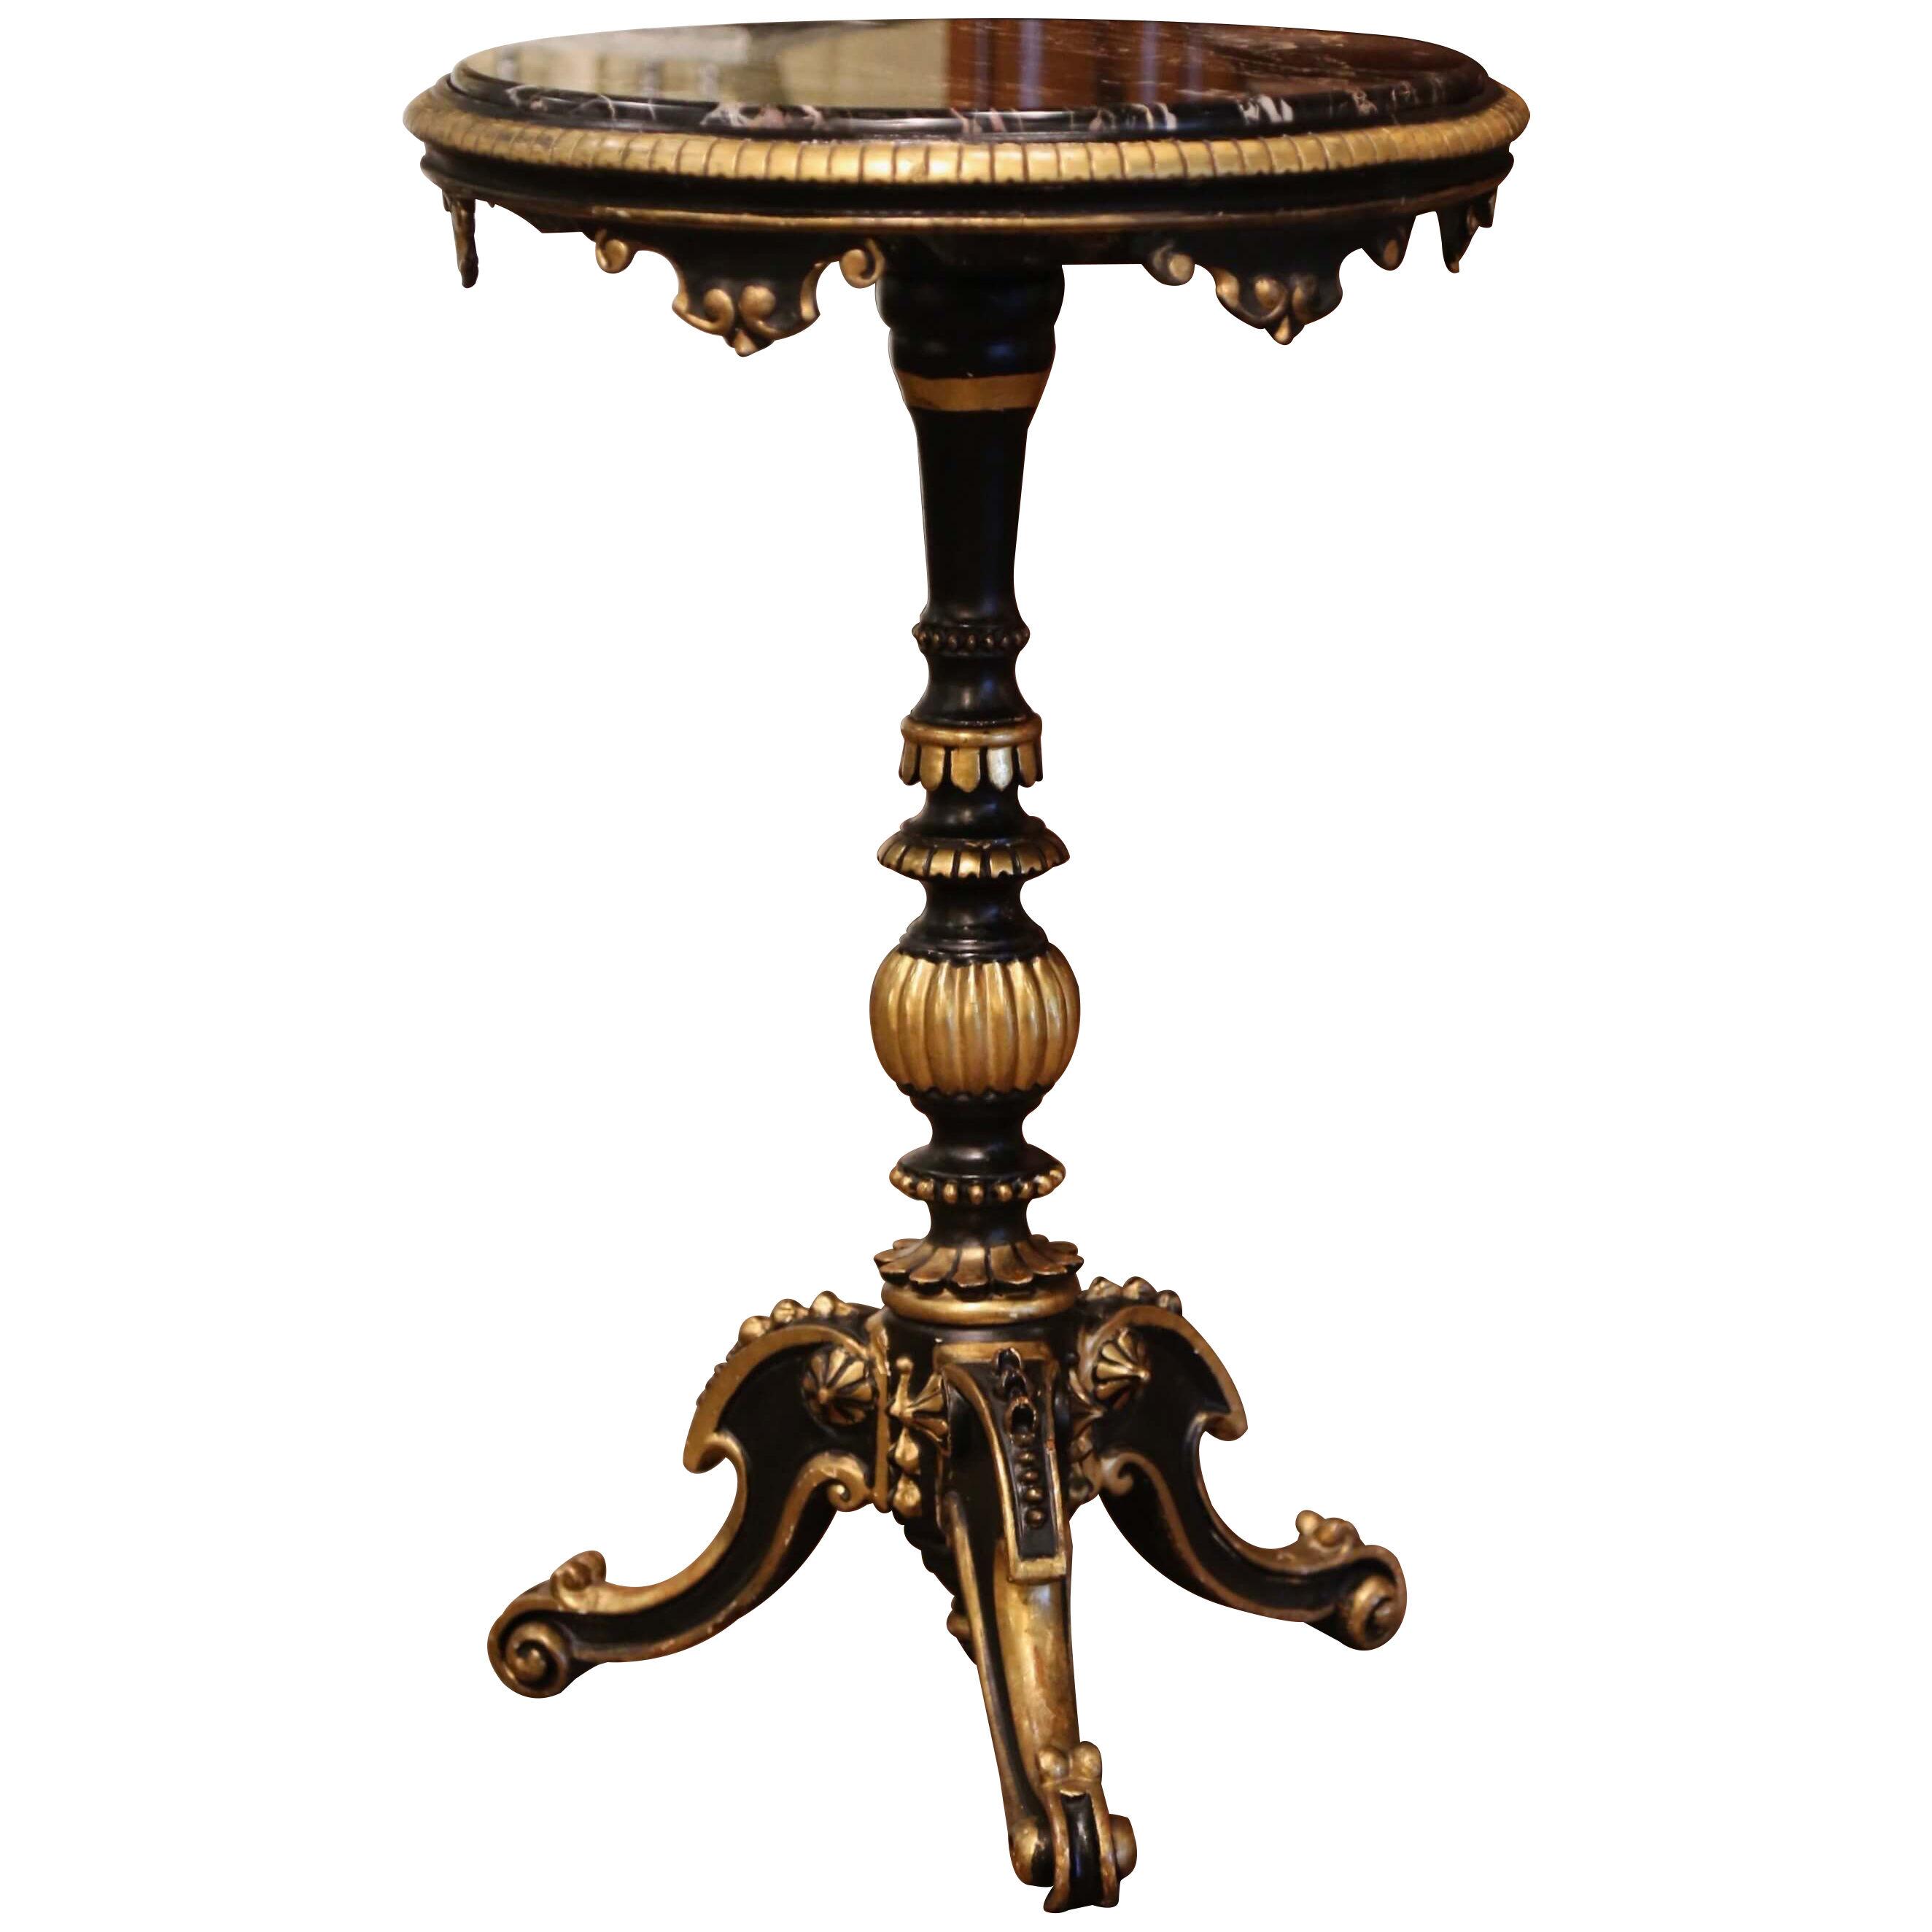 Mid-19th Century Italian Marble Top Carved Giltwood and Blackened Pedestal Table